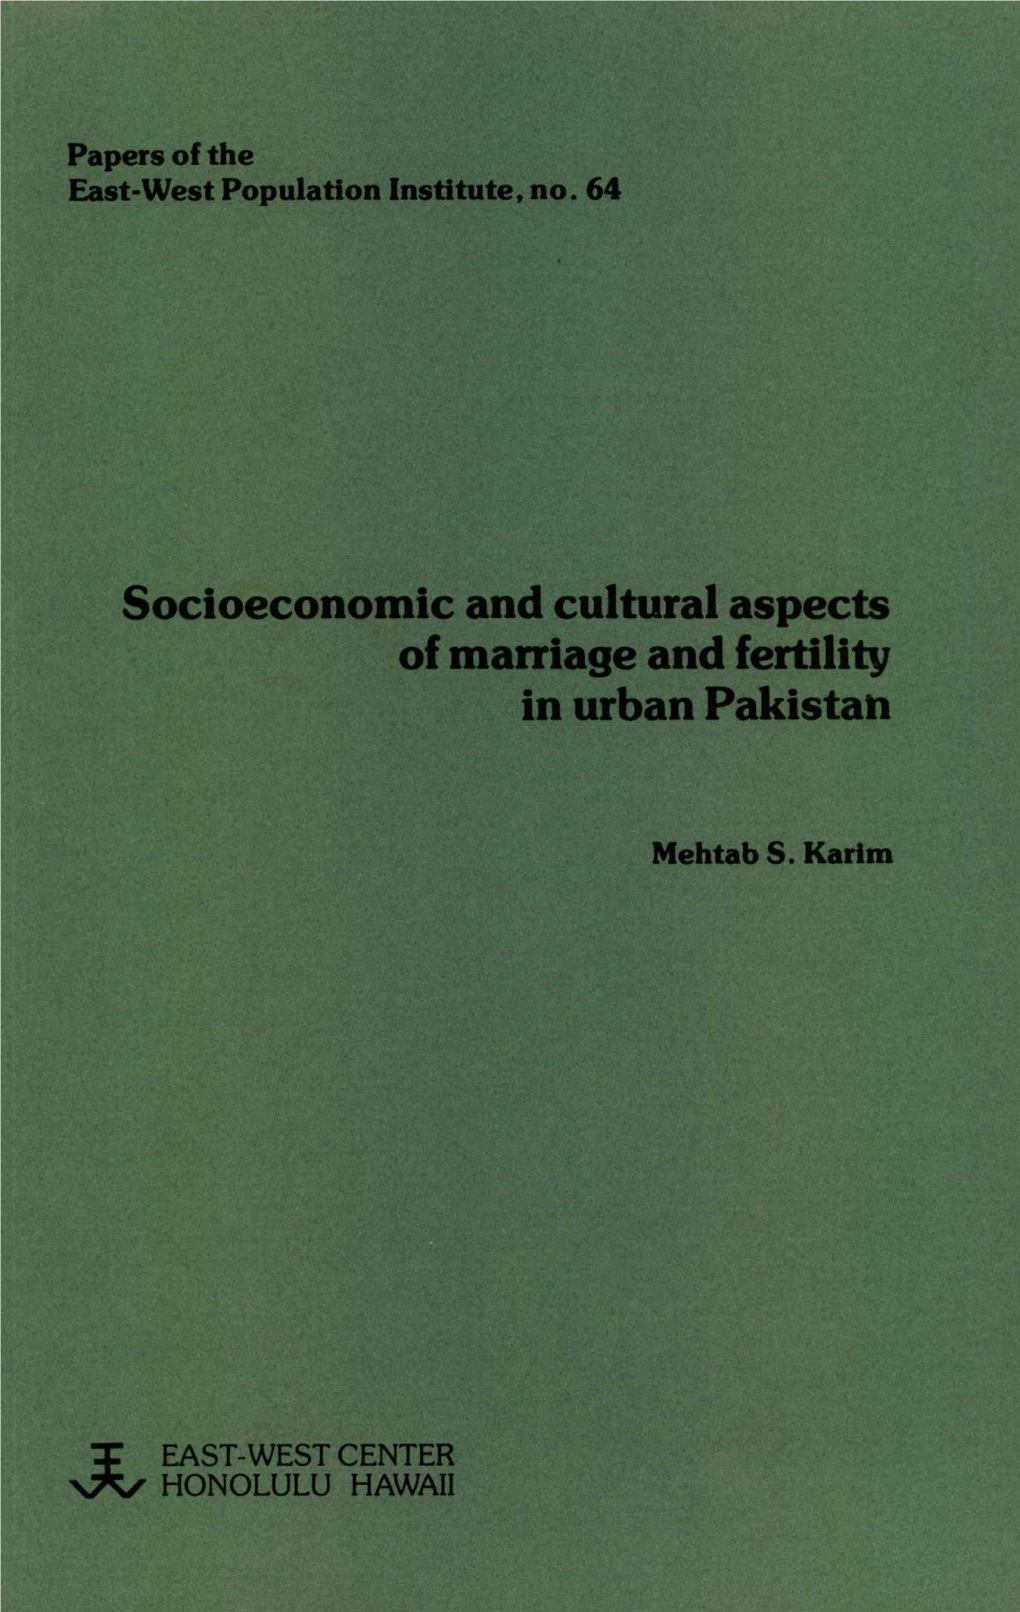 Socioeconomic and Cultural Aspects of Marriage and Fertility in Urban Pakistan